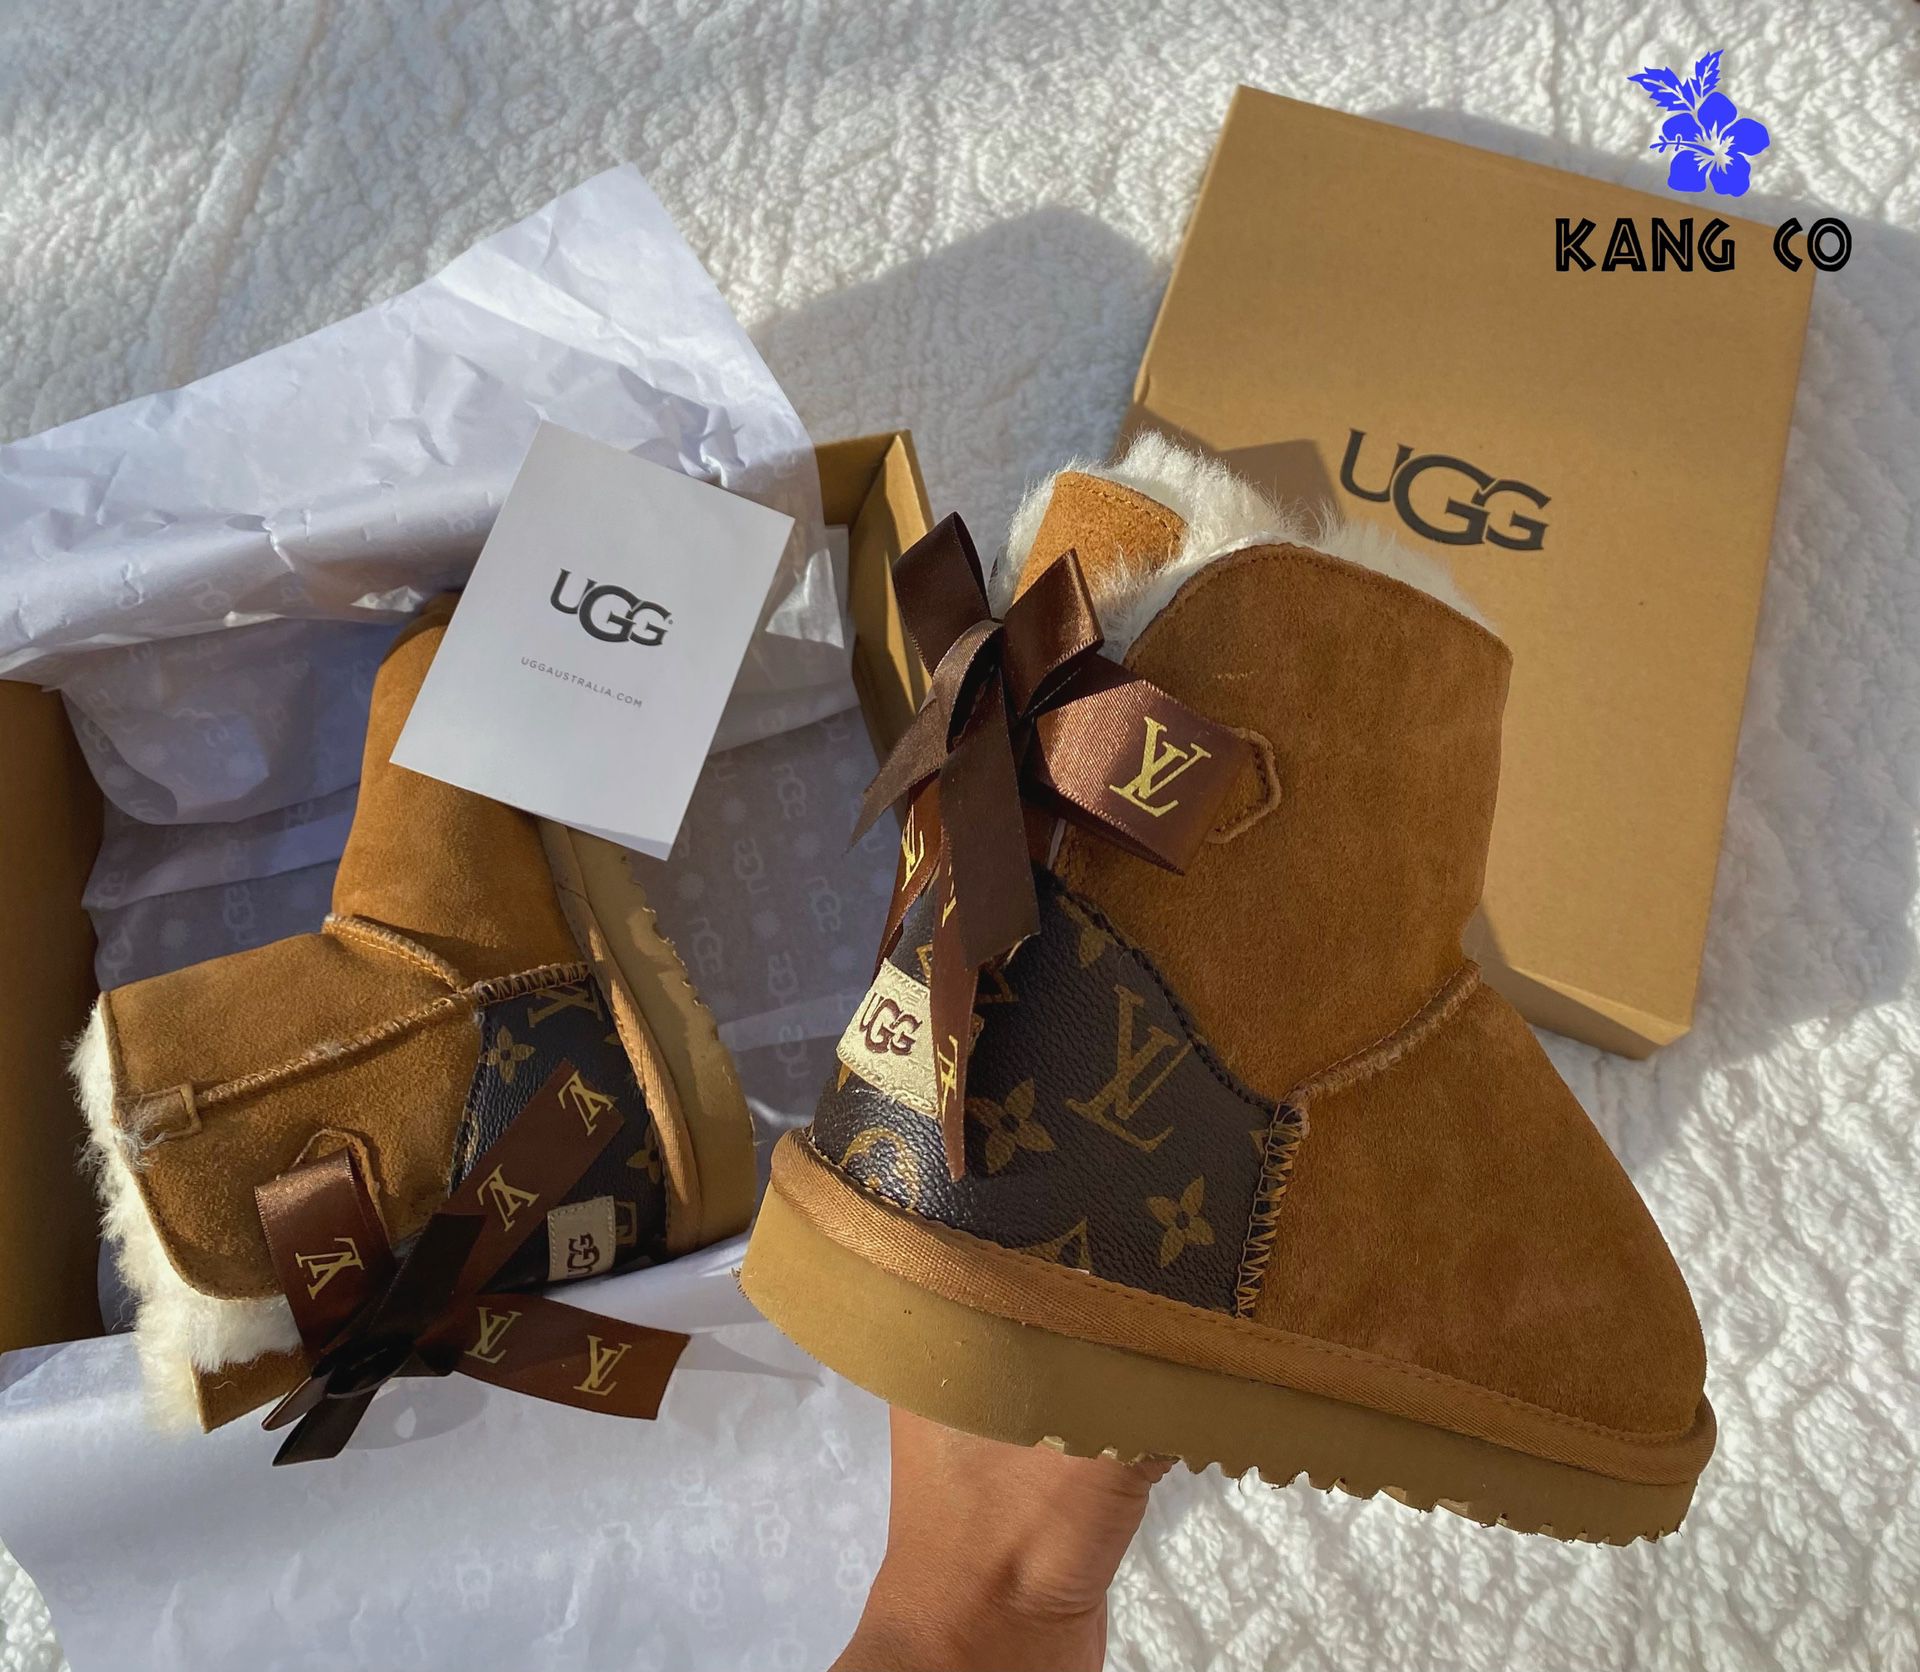 Mini Bailey Bow Ugg Boots Louis Vuitton Custom Canvas Boots for